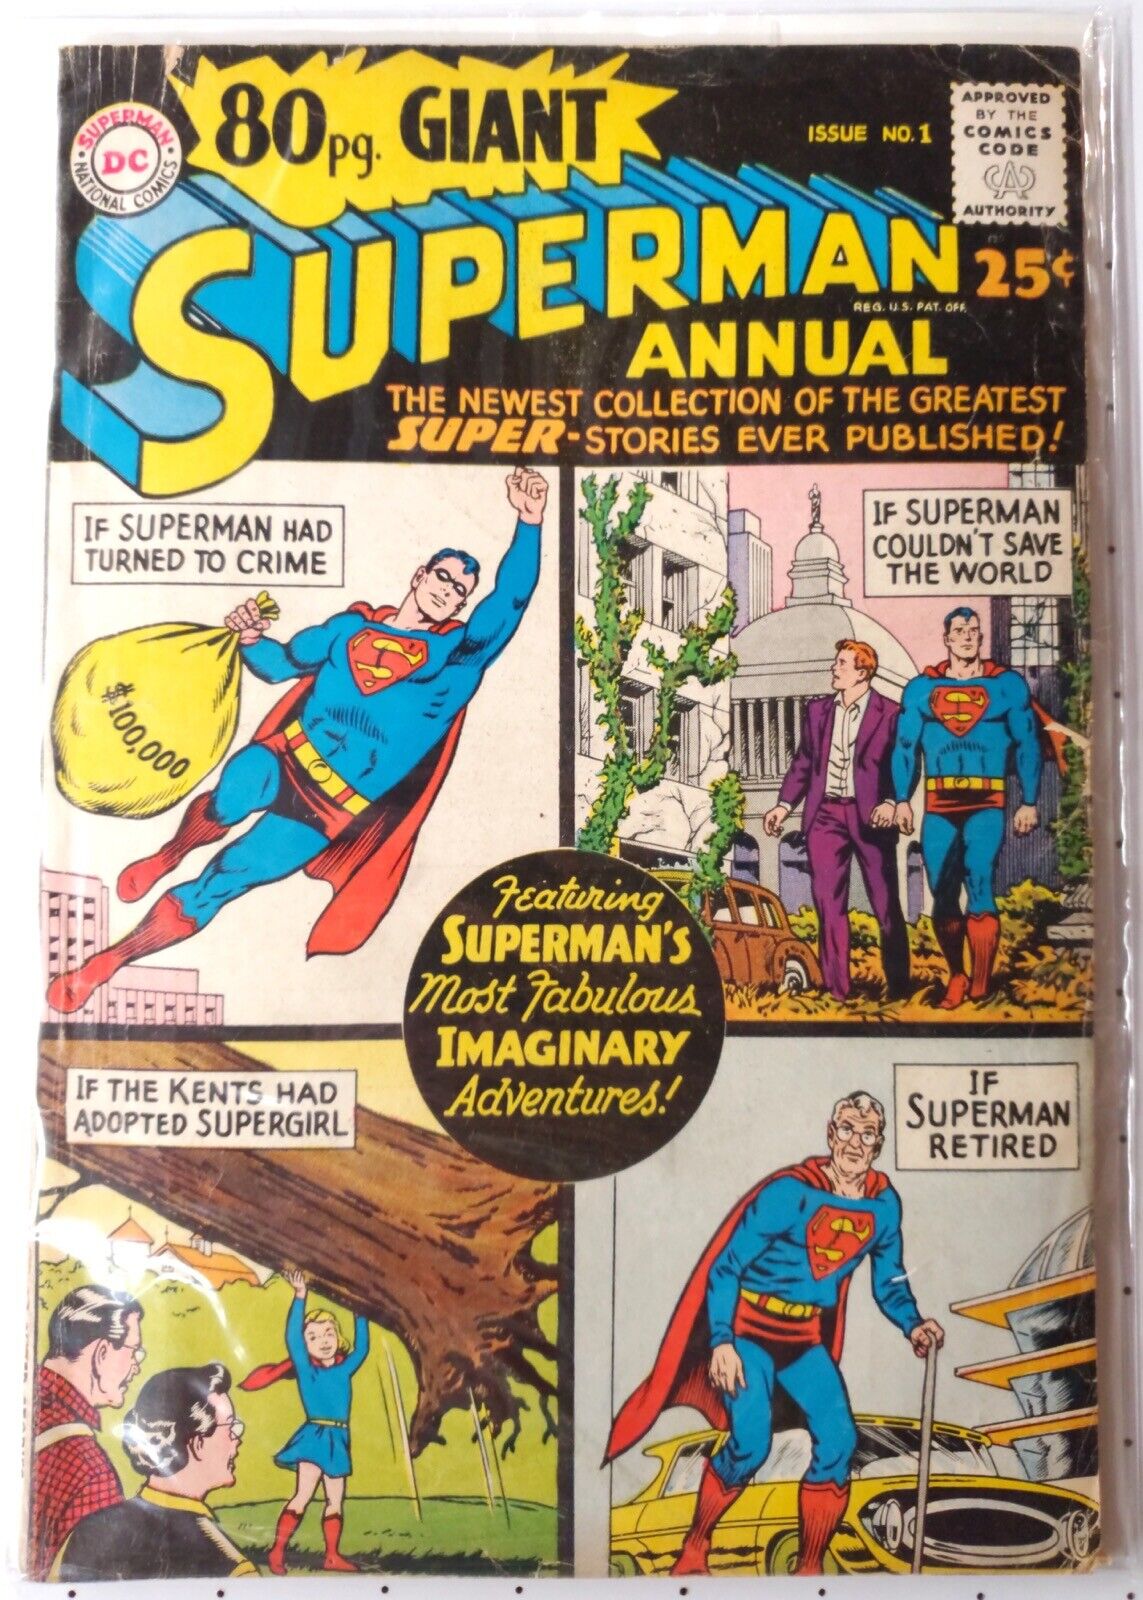 DC 80 PAGE GIANT SUPERMAN ANNUAL #1 1964 GD